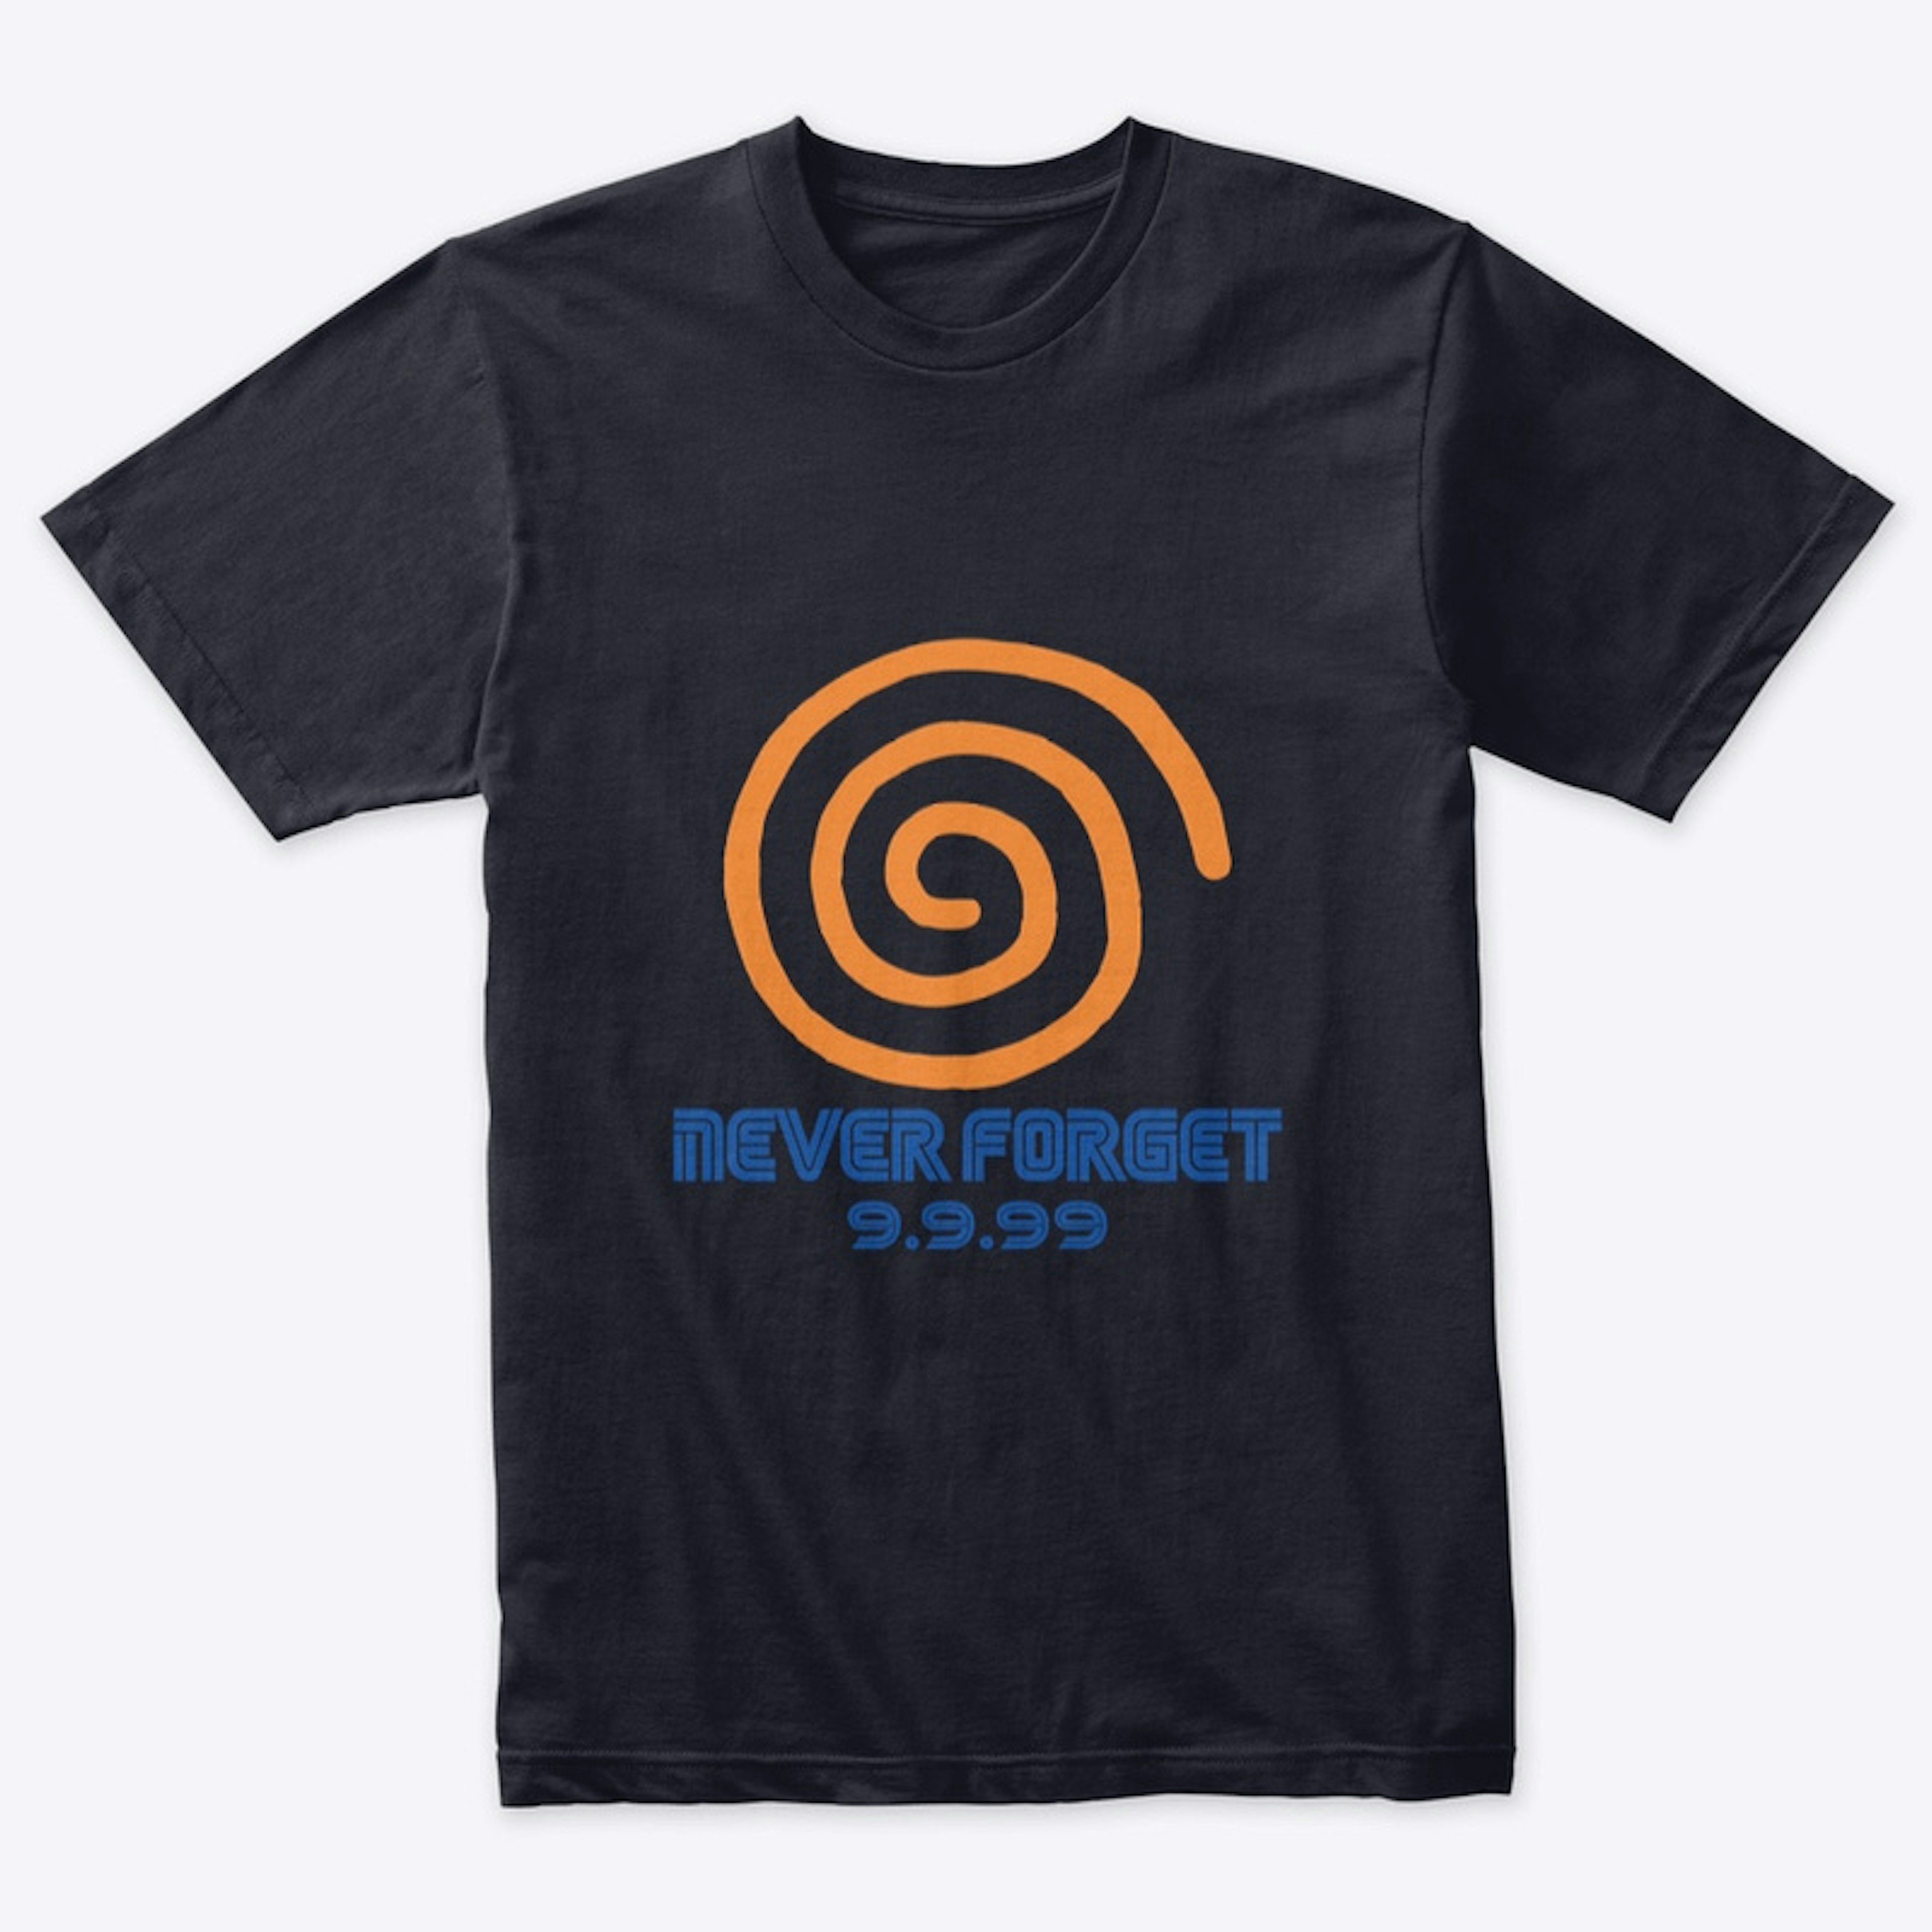 Never Forget Dreamcast Tee